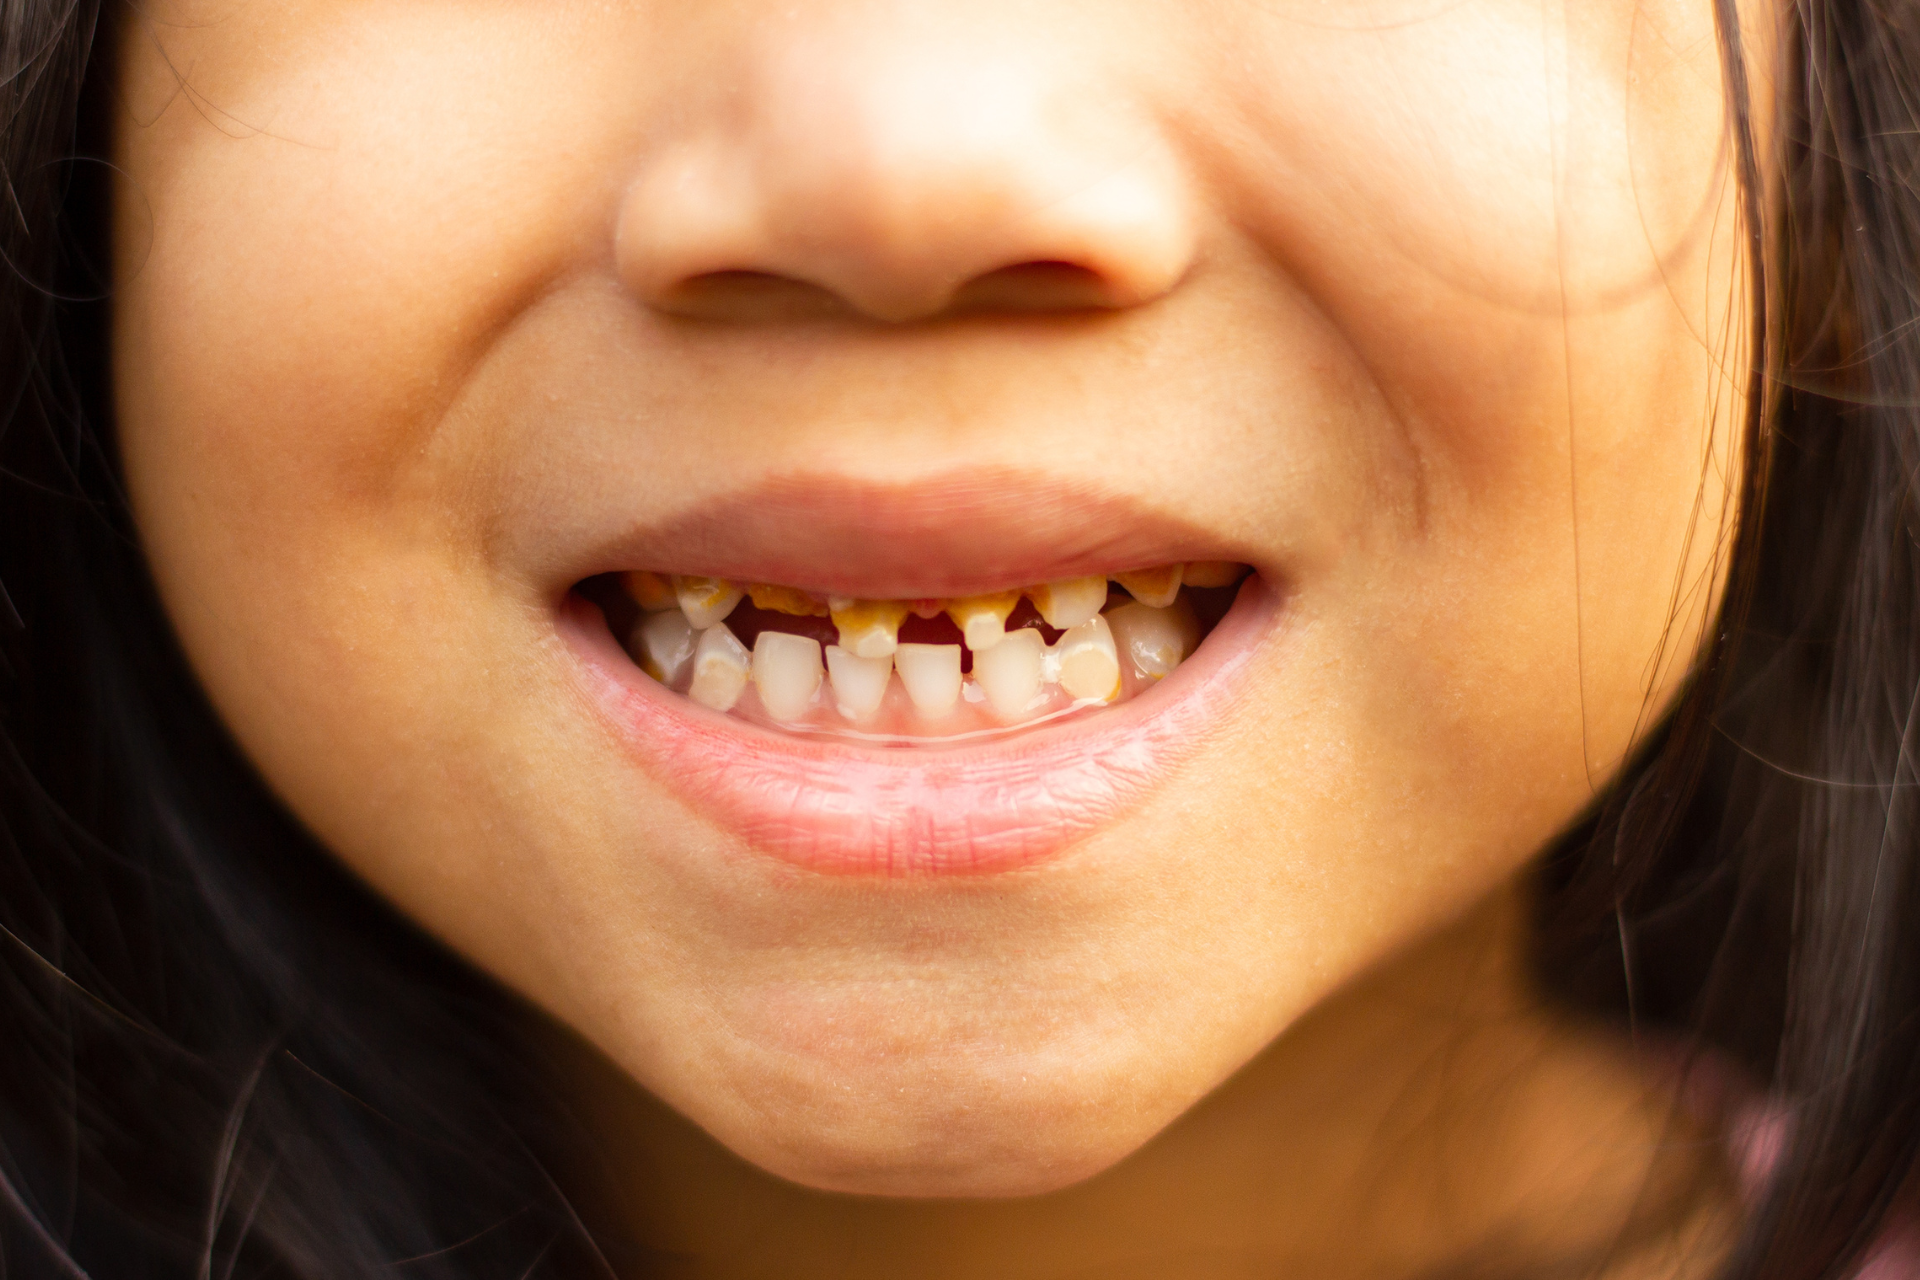 a close up of a child 's mouth with a tooth missing